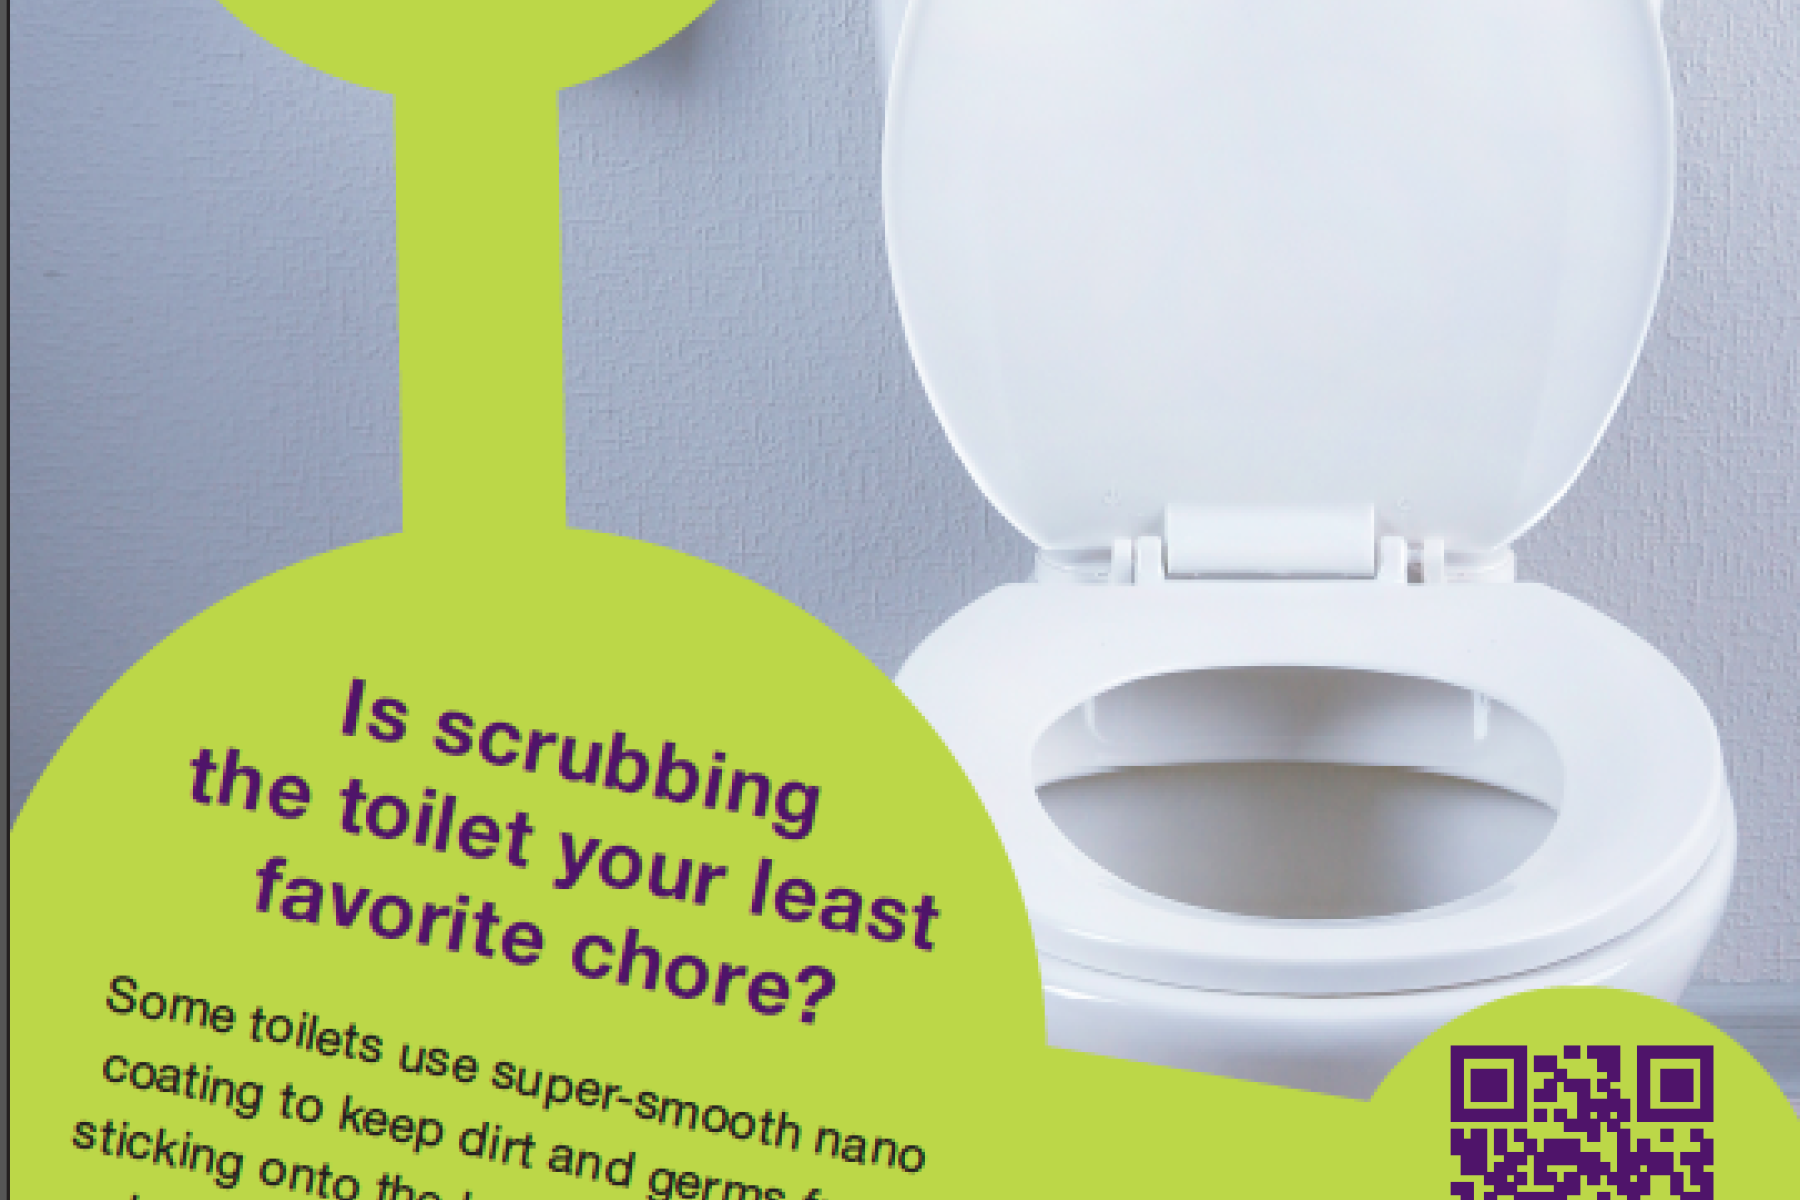 A poster of a toilet depicting nano science technology that can help clean surfaces